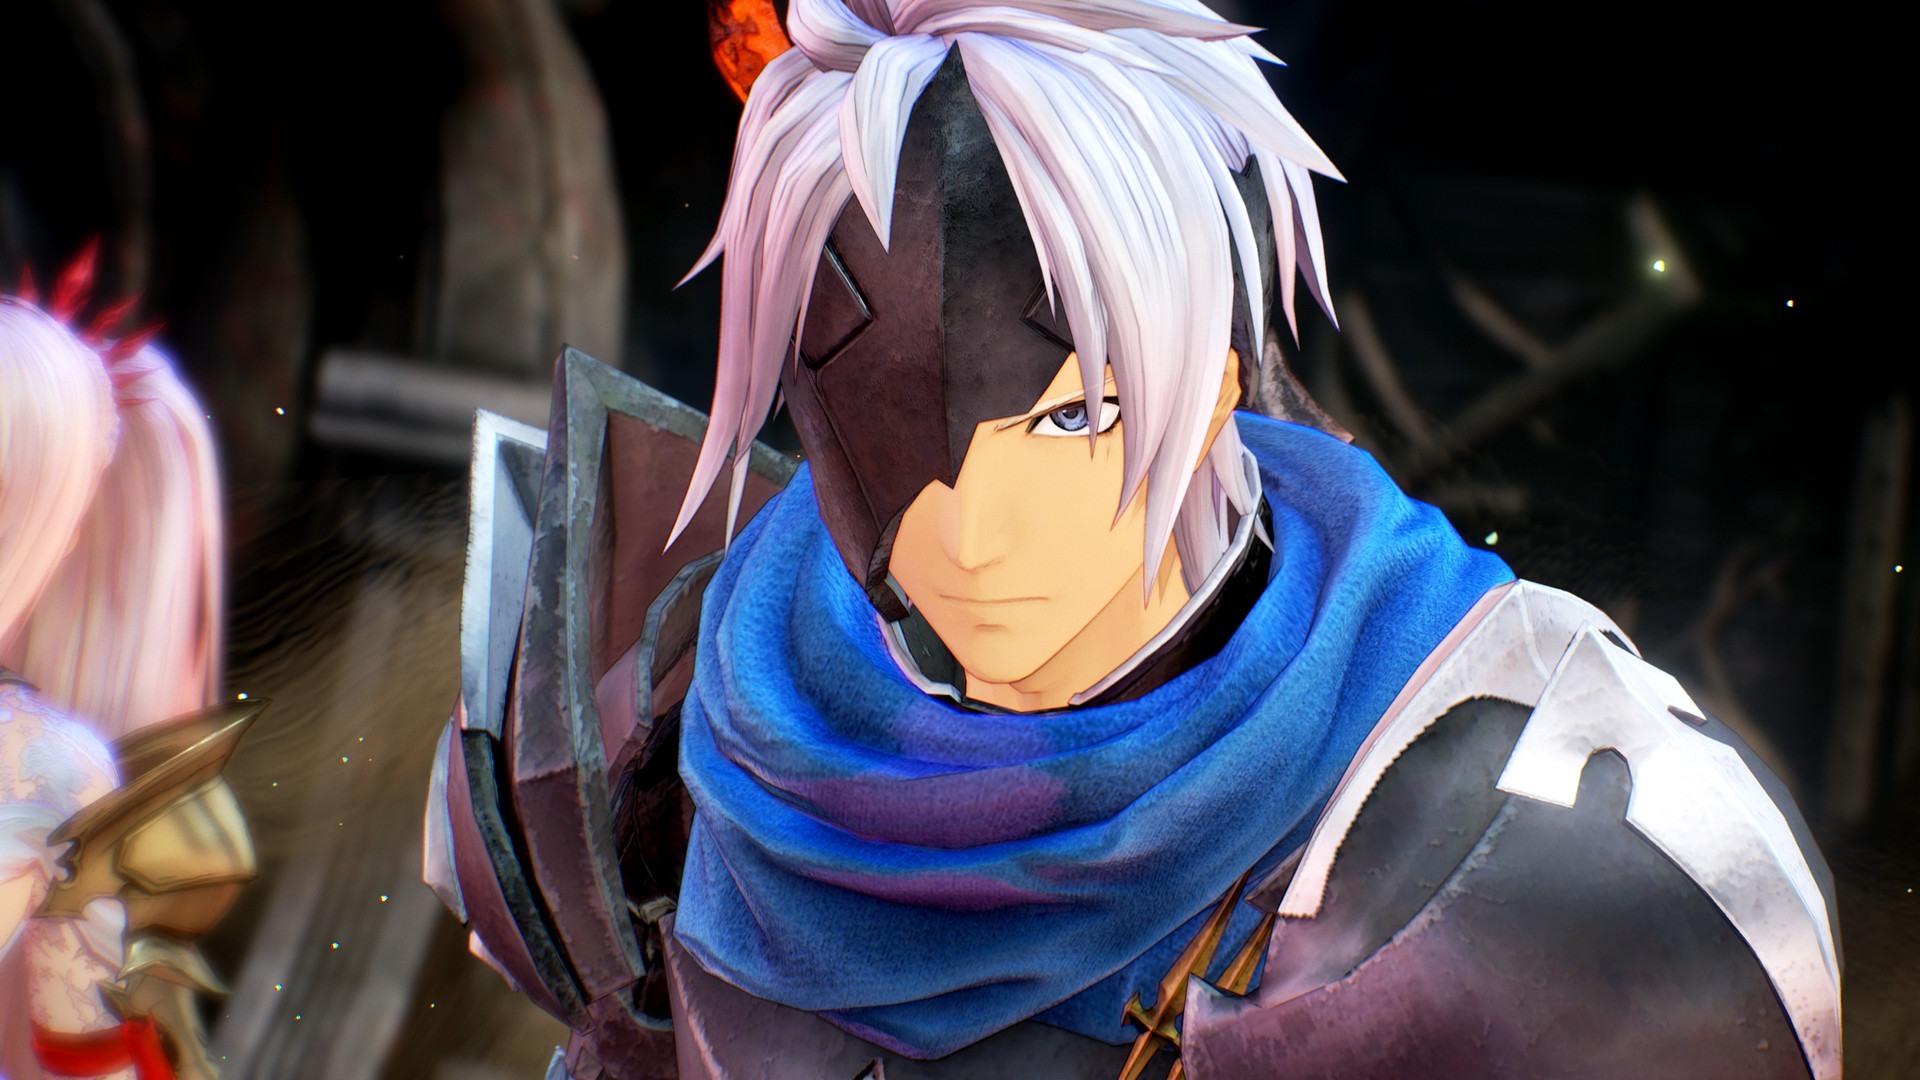 Tales of Arise has been bought more than 2 million times